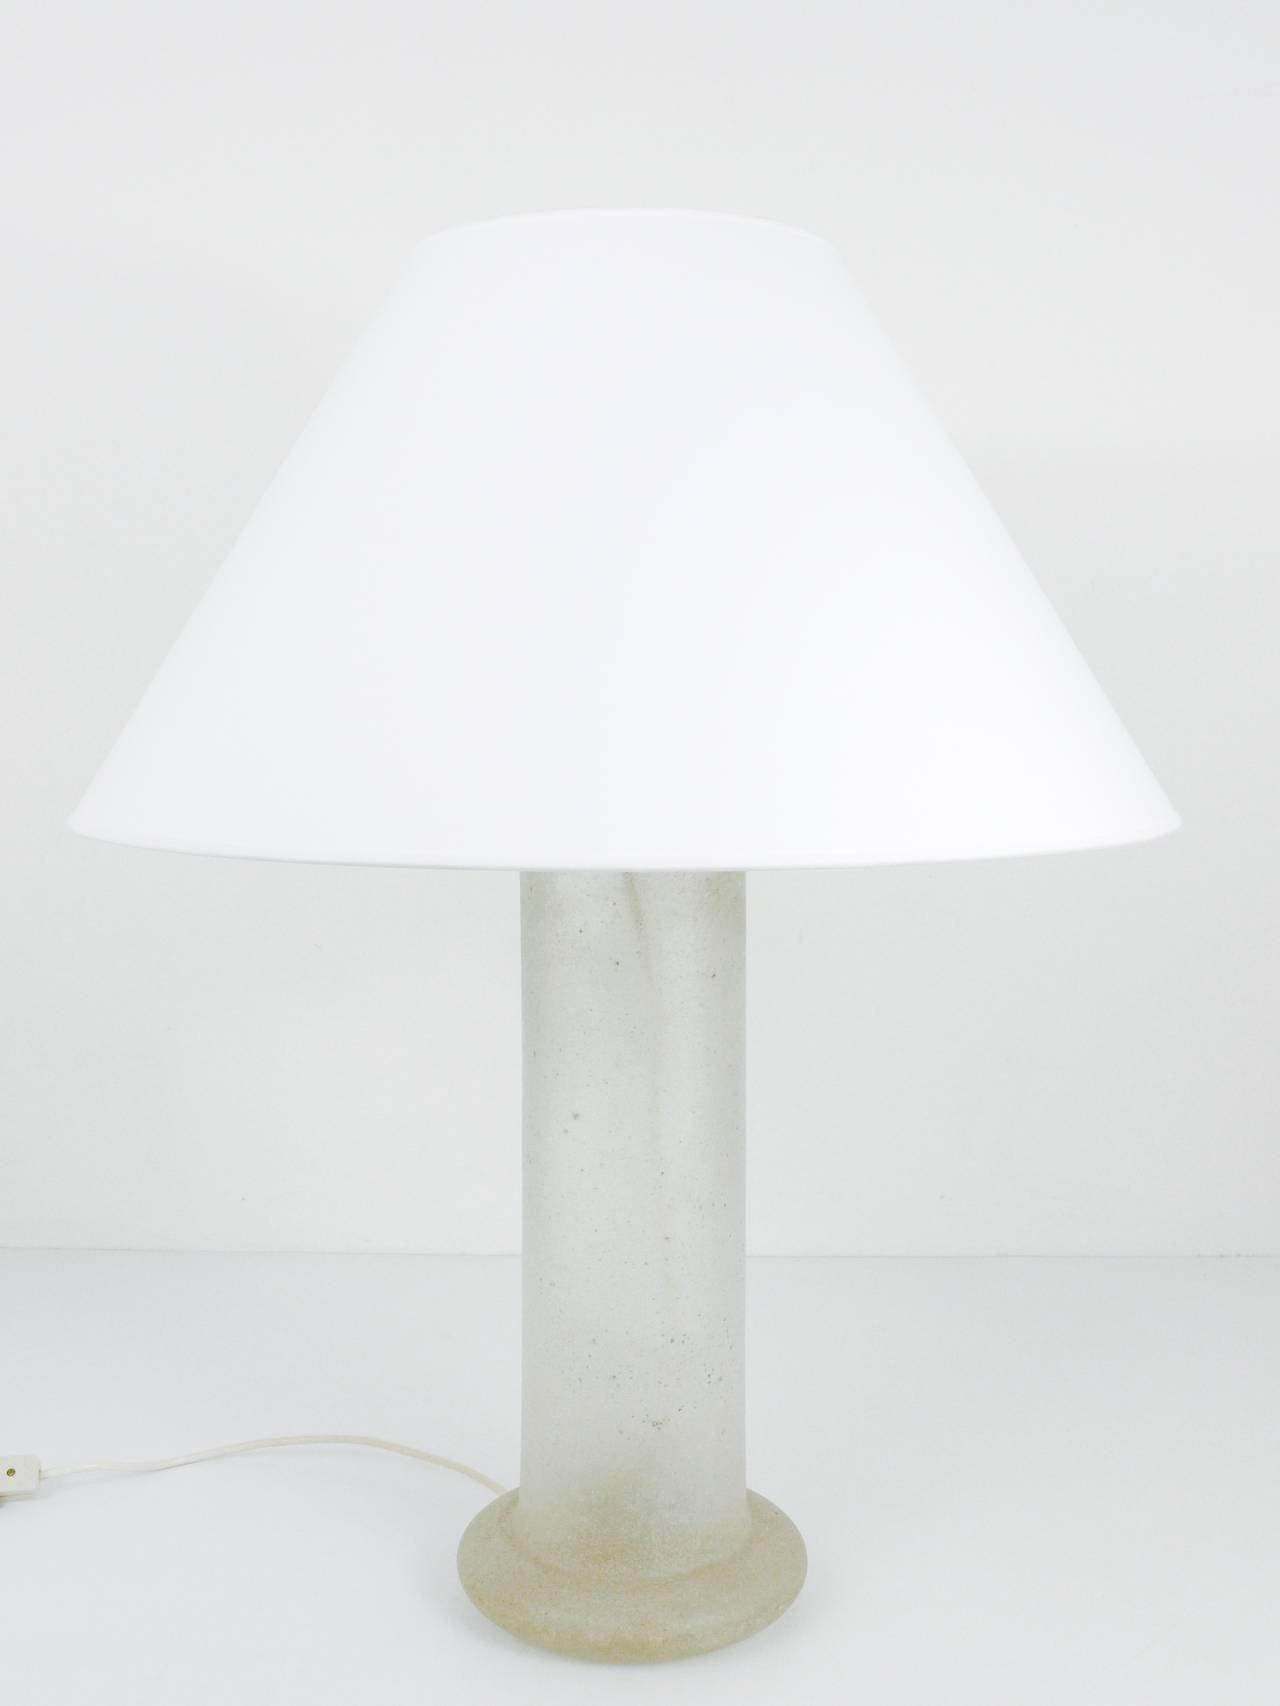 American Signed Karl Springer Table Lamp with a Sandblasted Glass Base, 1970s For Sale